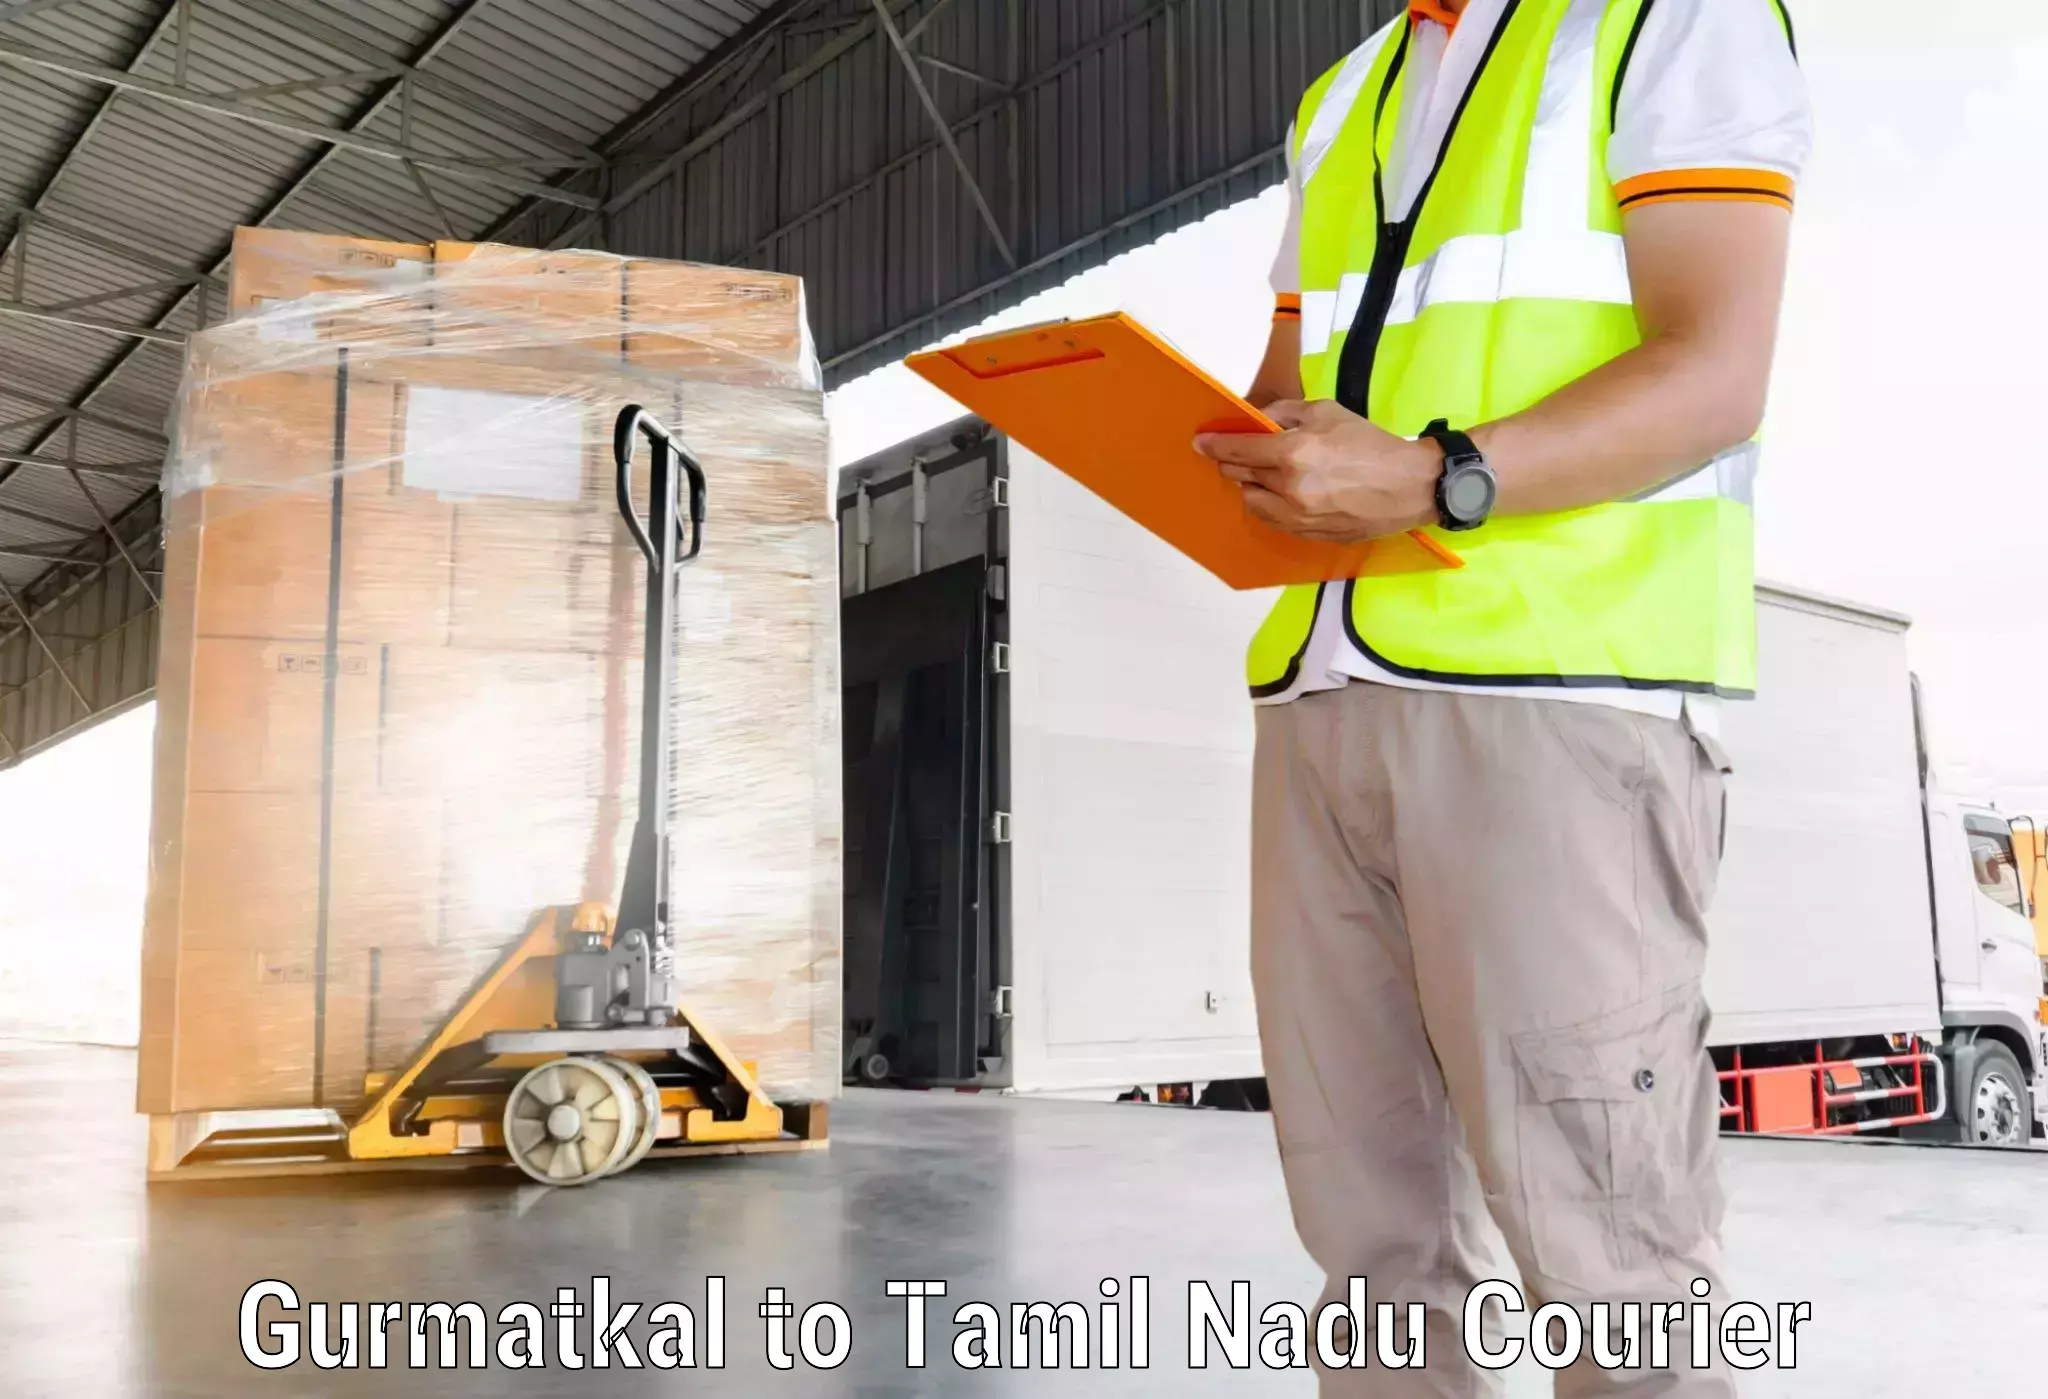 Sustainable delivery practices Gurmatkal to Chennai Port